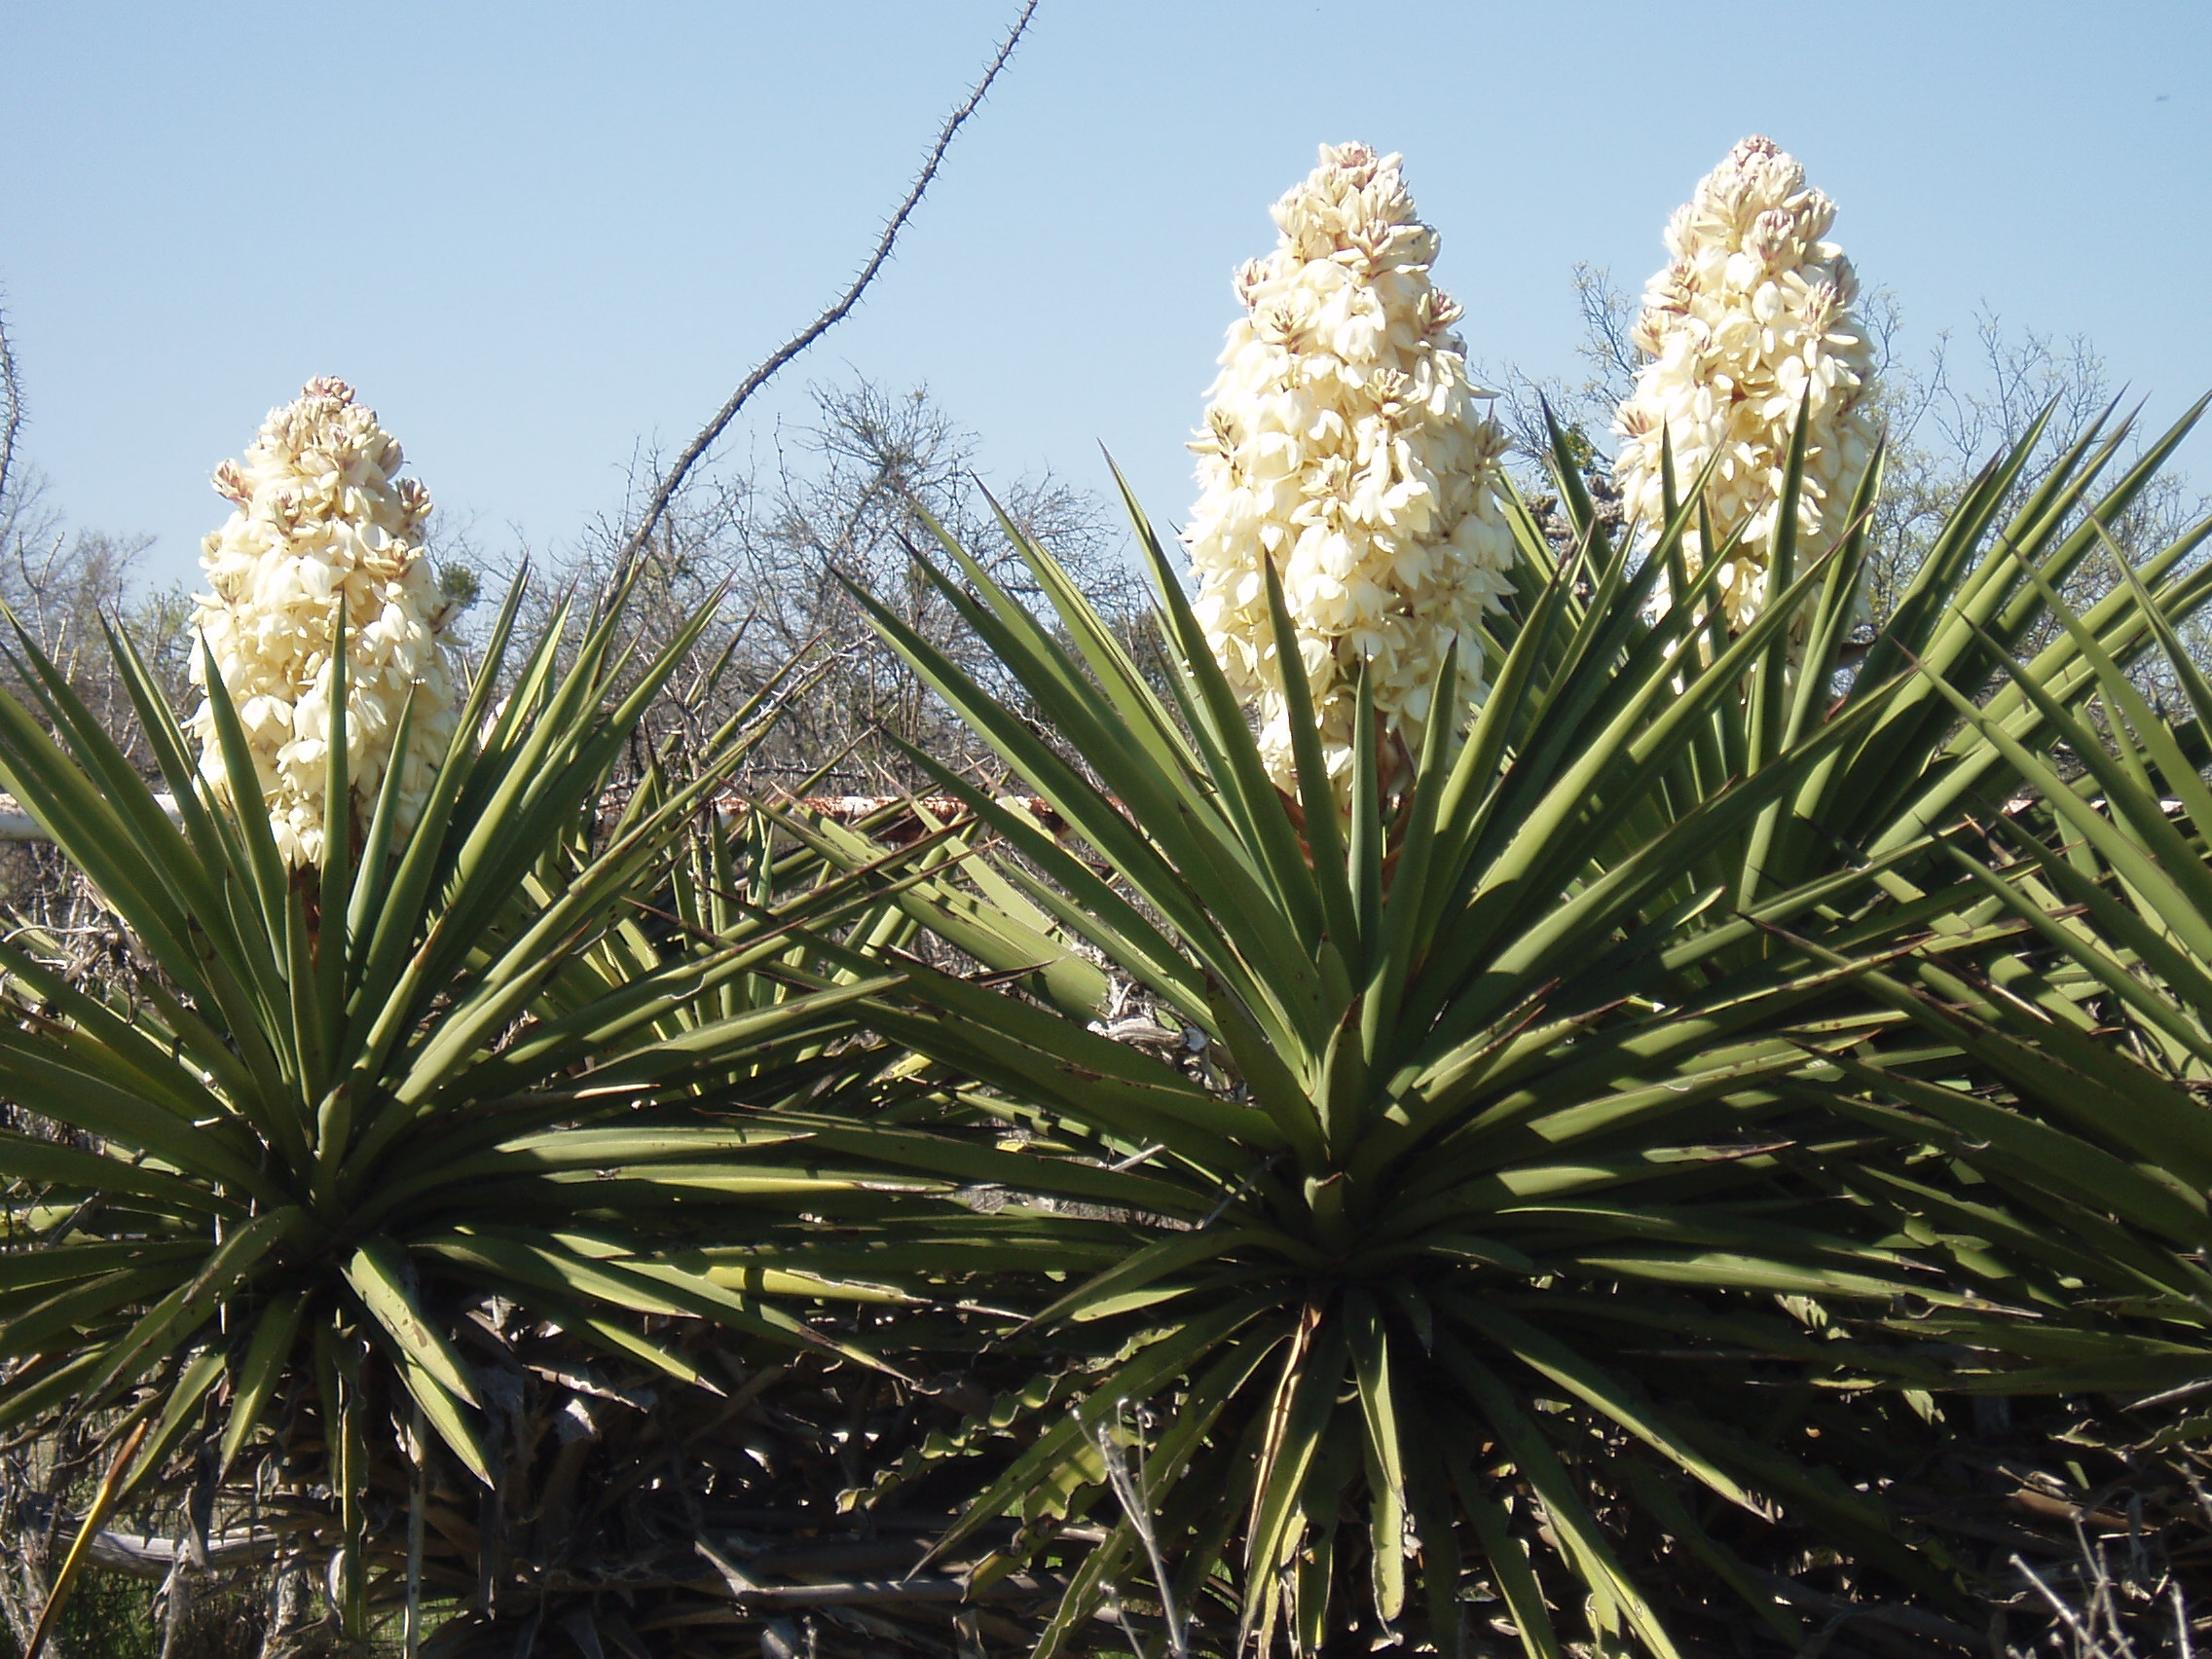 Texas yucca plant in blossom